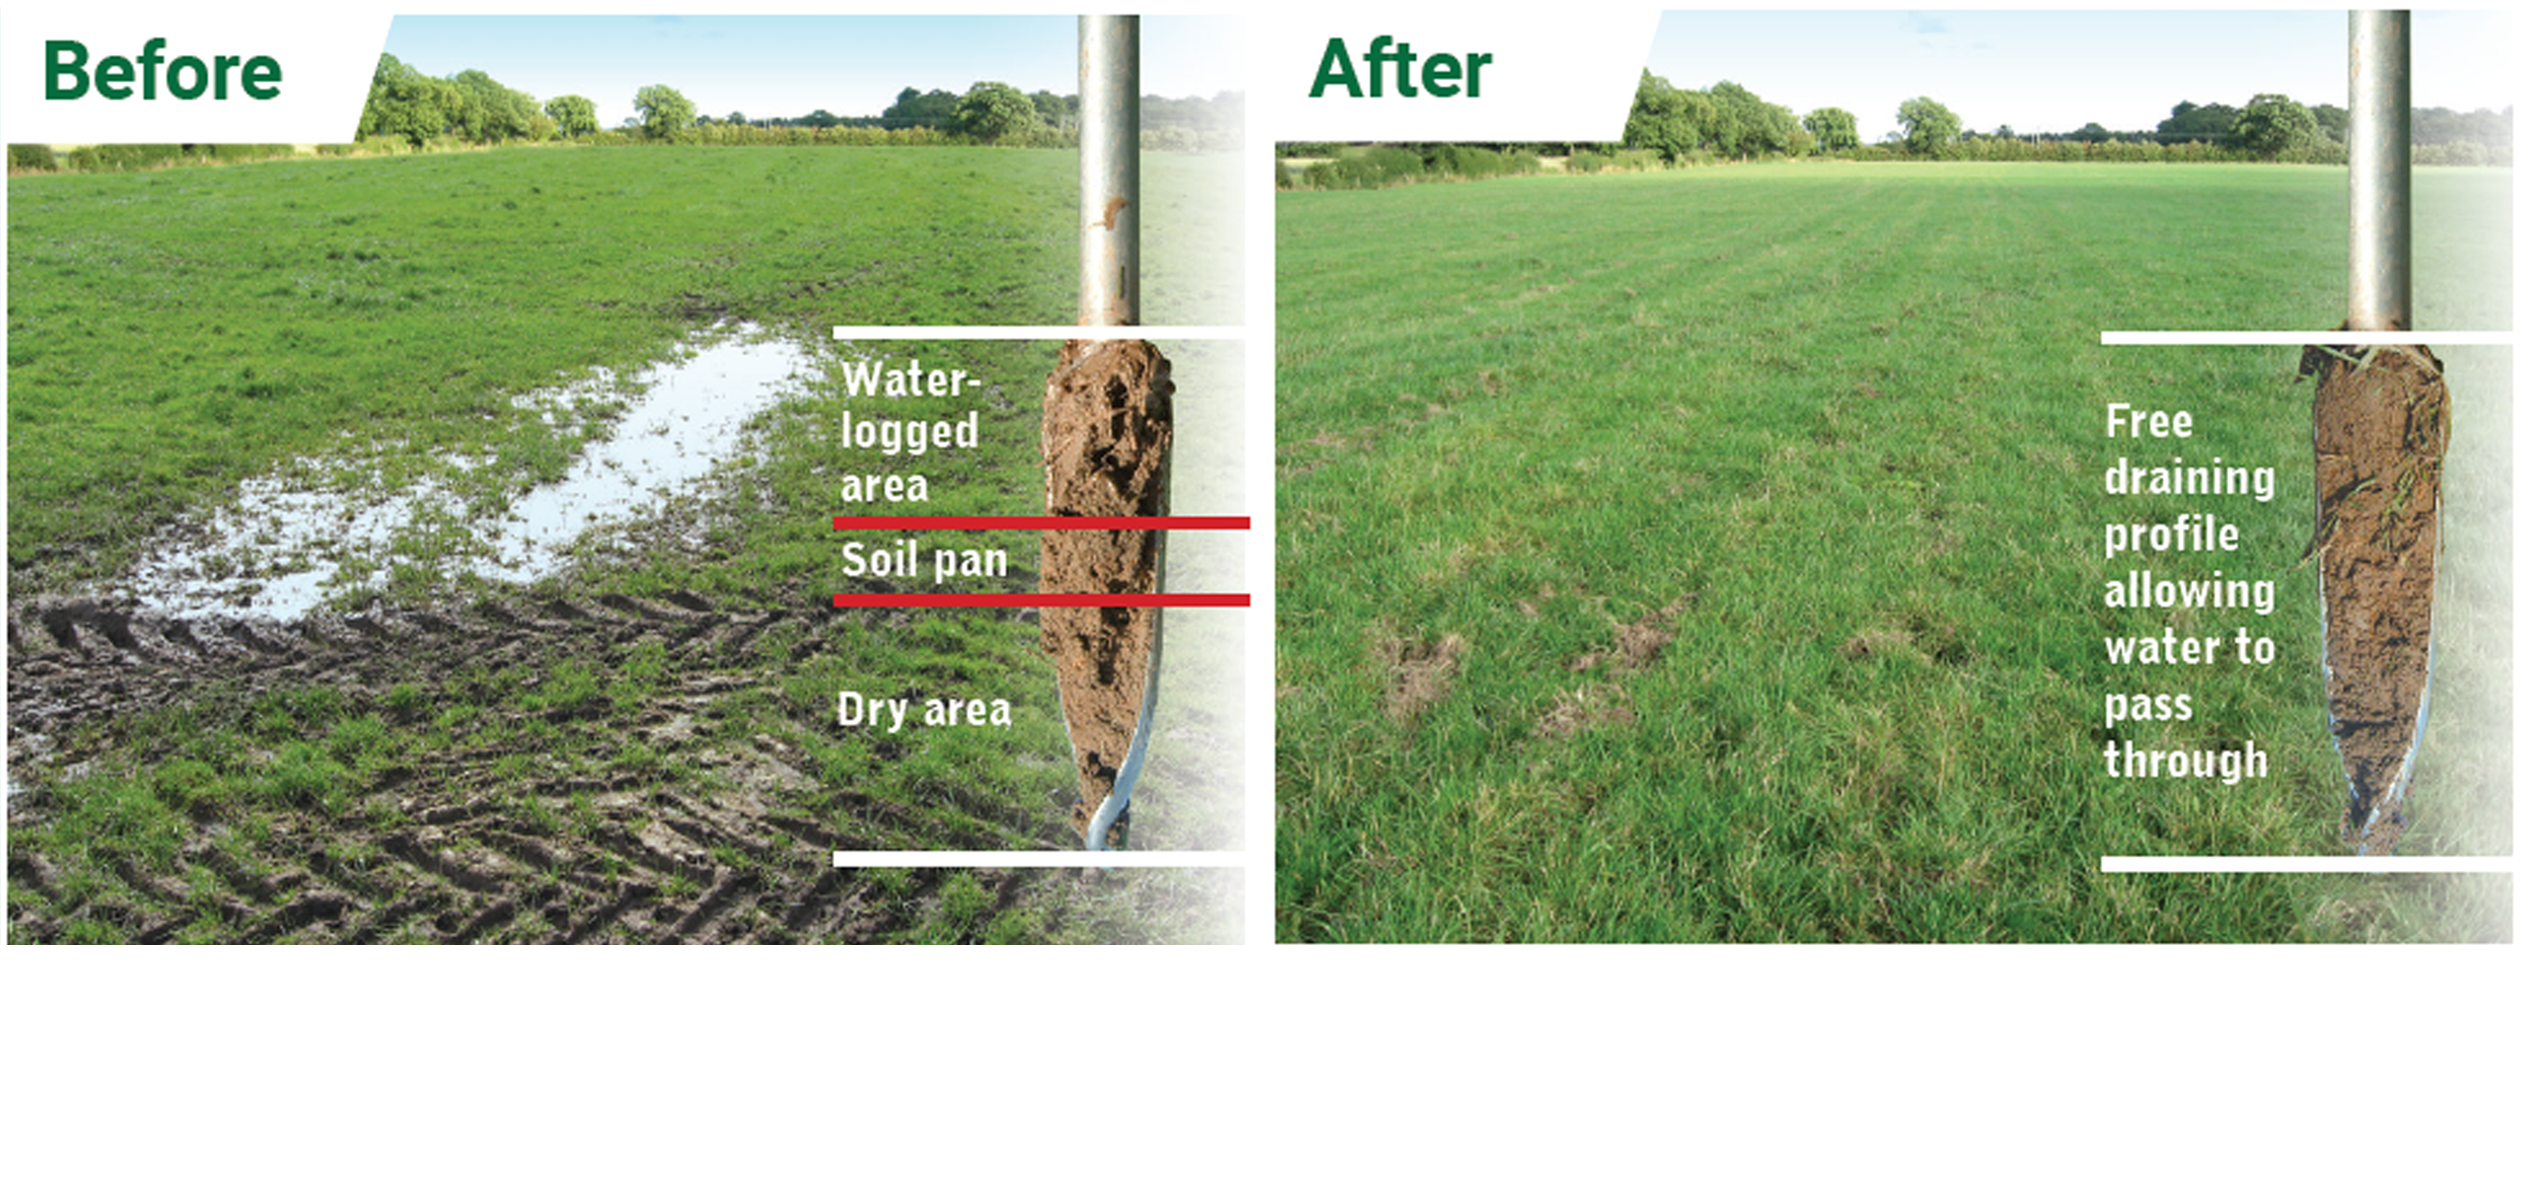 Sward Lifting - before and after comparison images